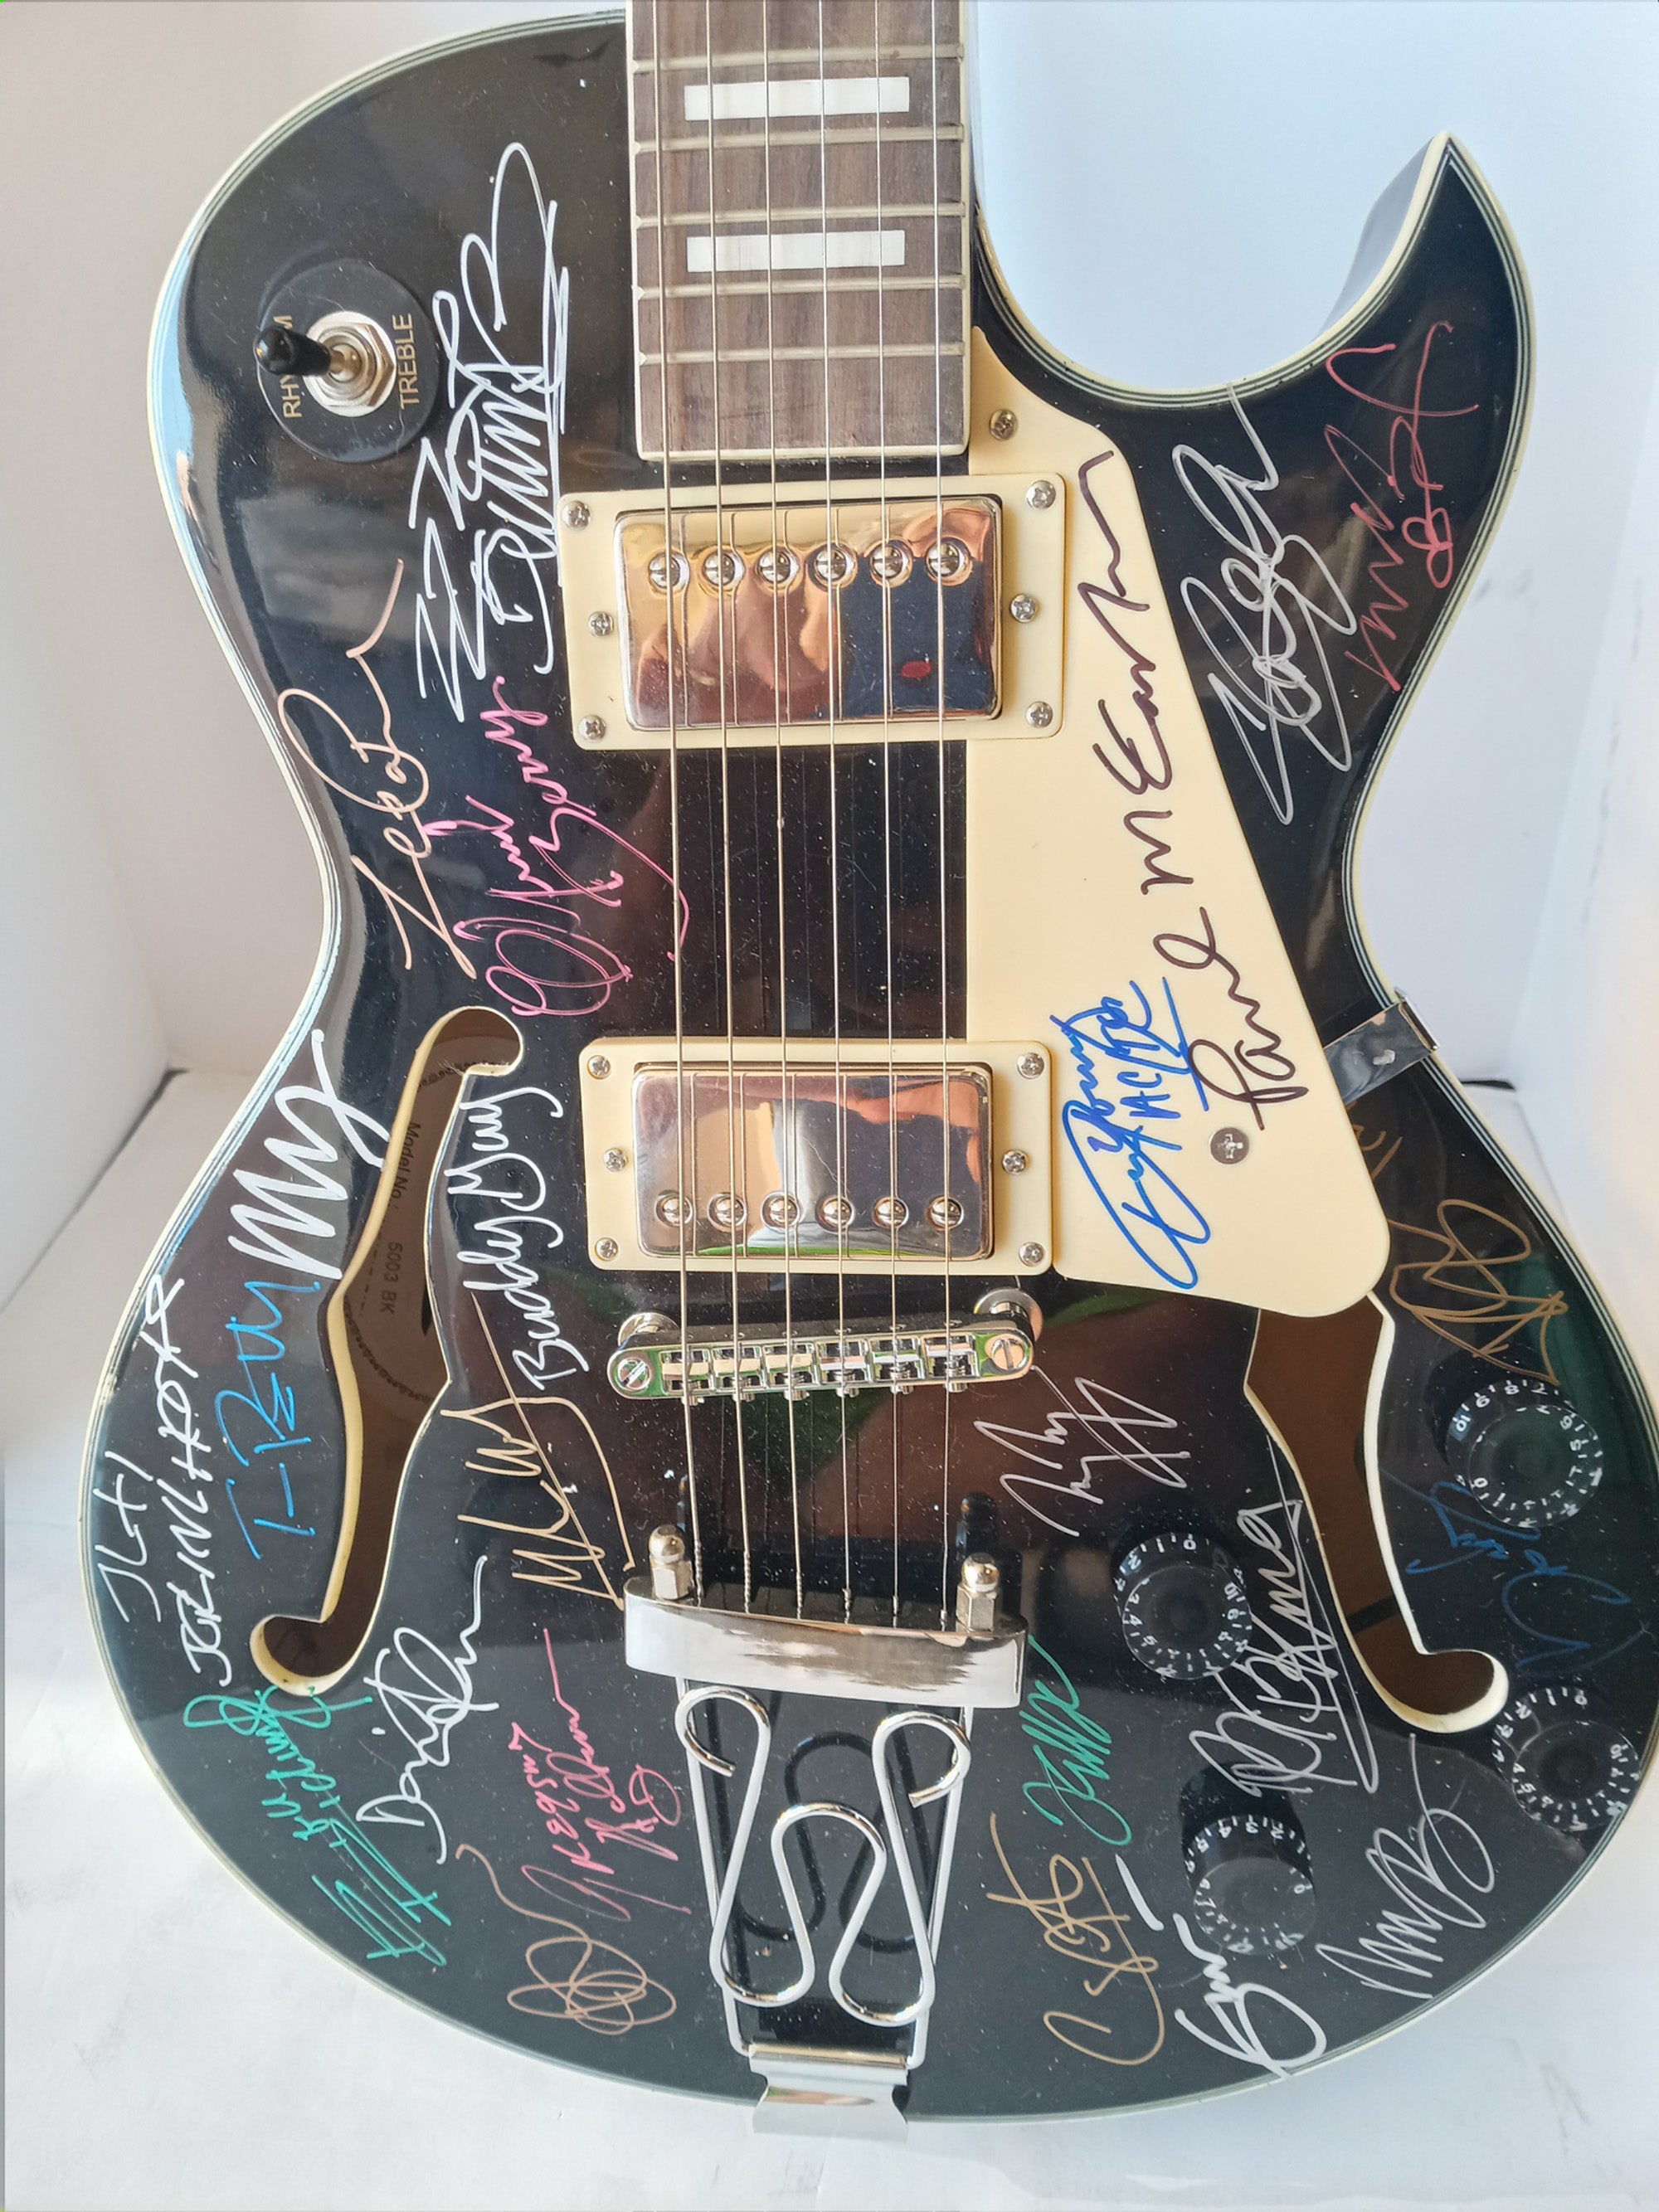 Paul McCartney, B.B. King, Eric Clapton, 22 Rock and Roll icons Les Paul hollow body guitar signed